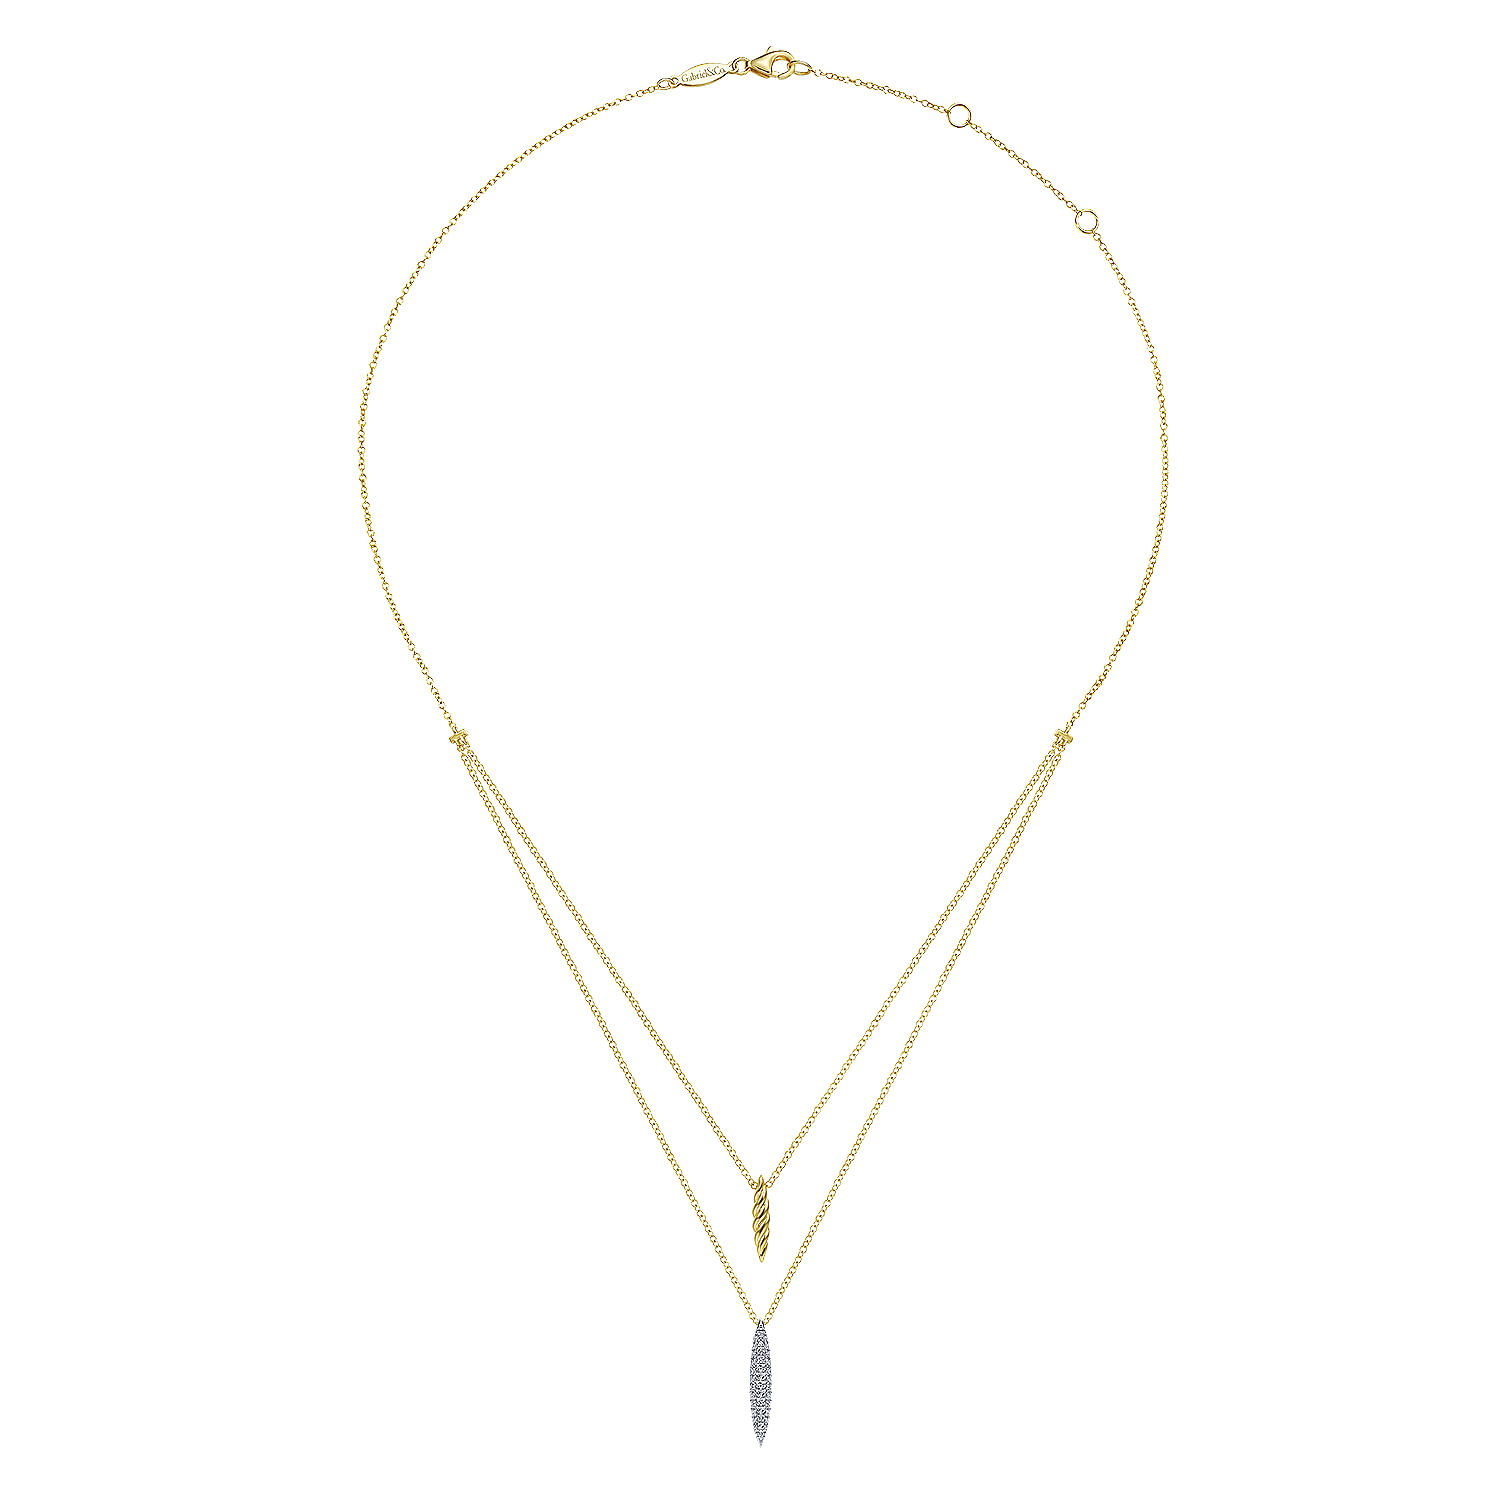 14K Yellow-White Gold Two Strand Necklace with Twisted Rope and Pavé Diamond Spike